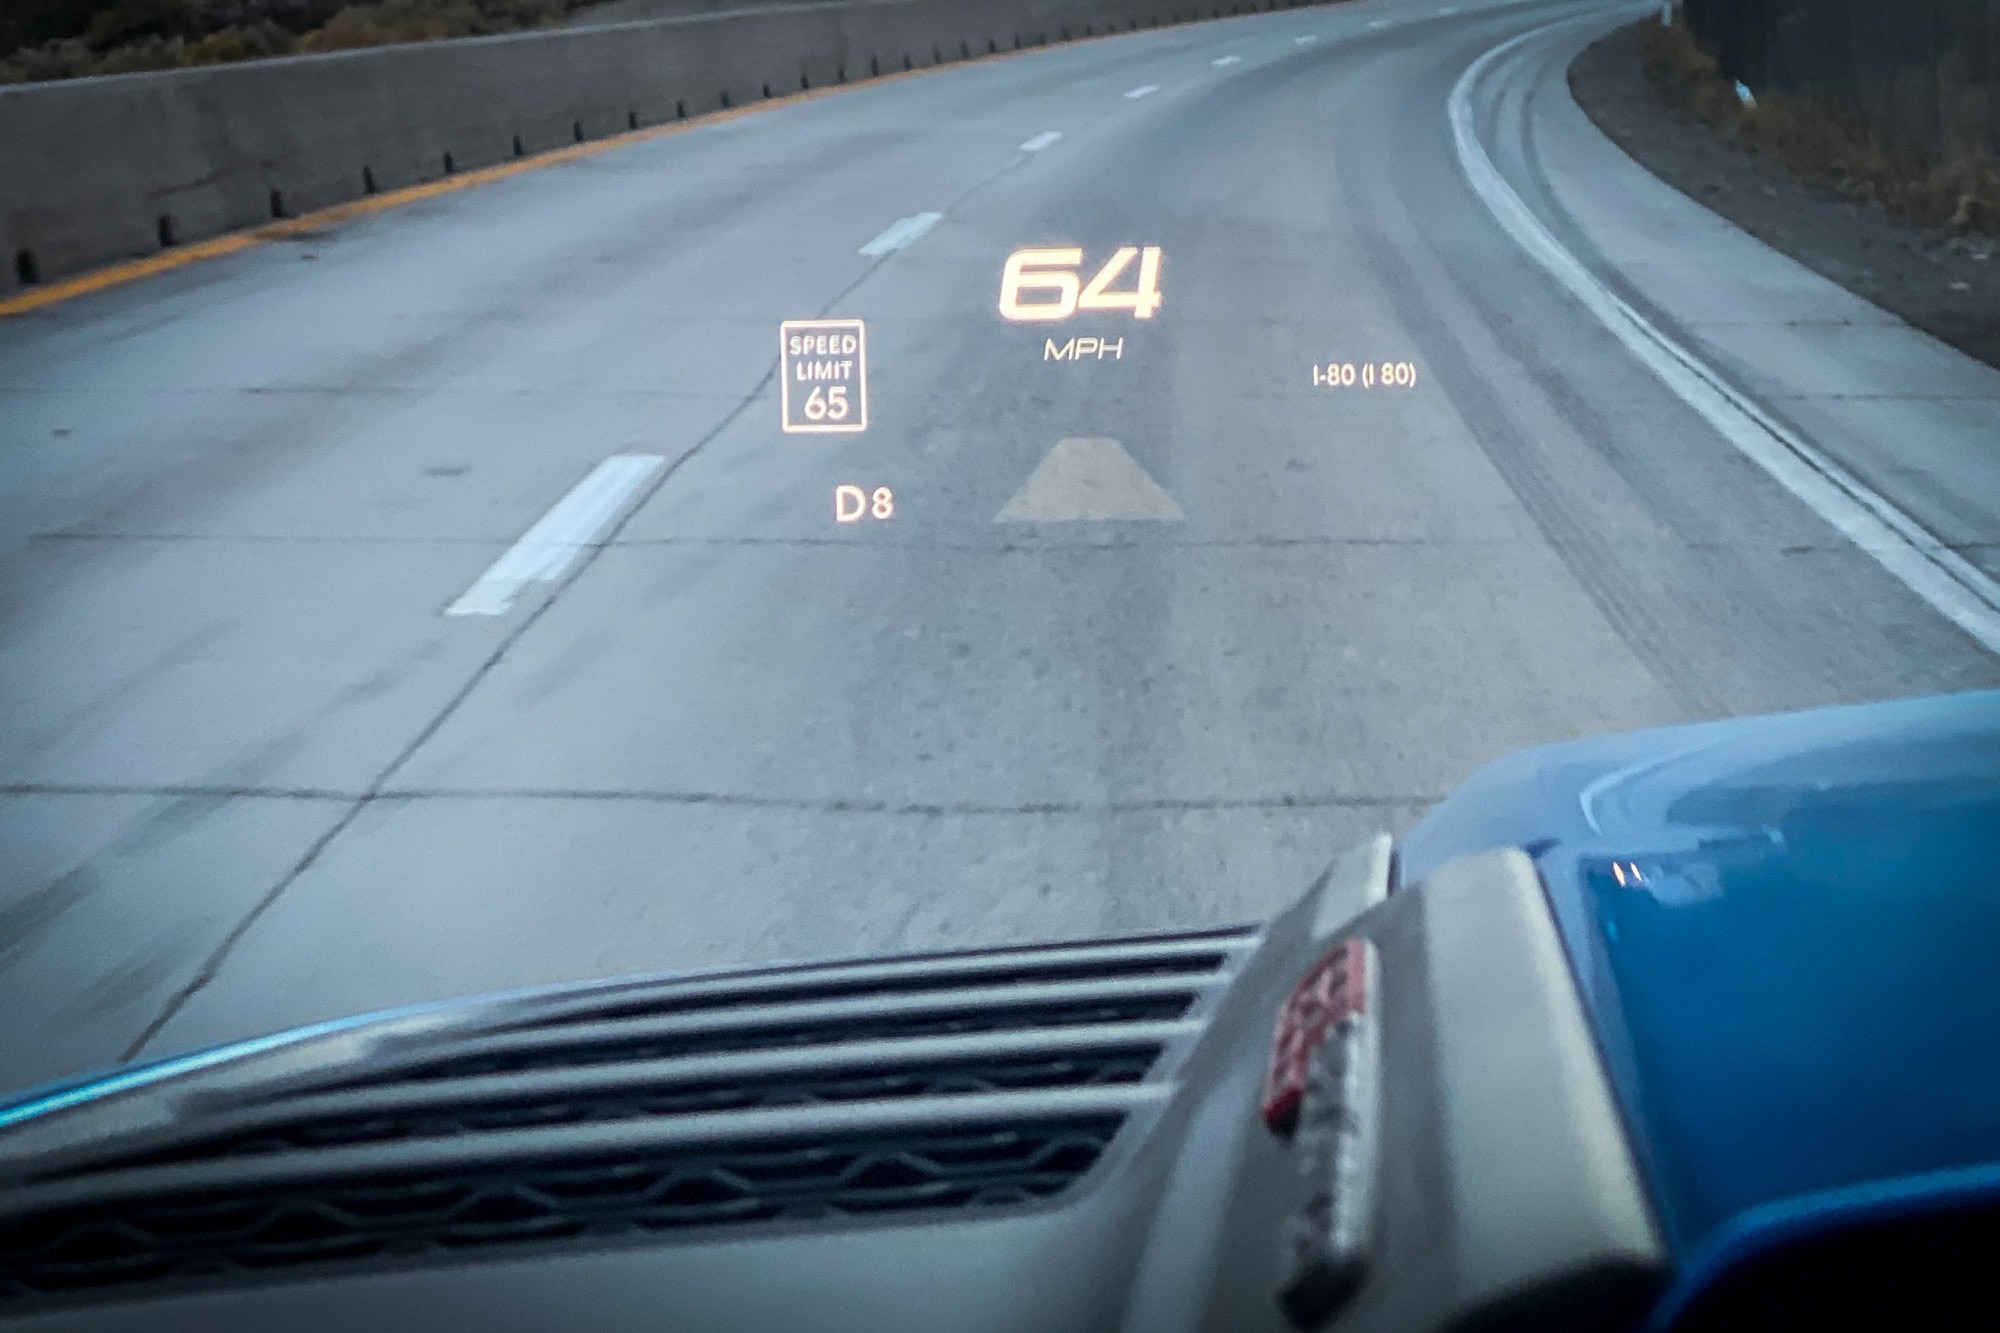 Head-up display in a 2023 Ford Super Duty truck